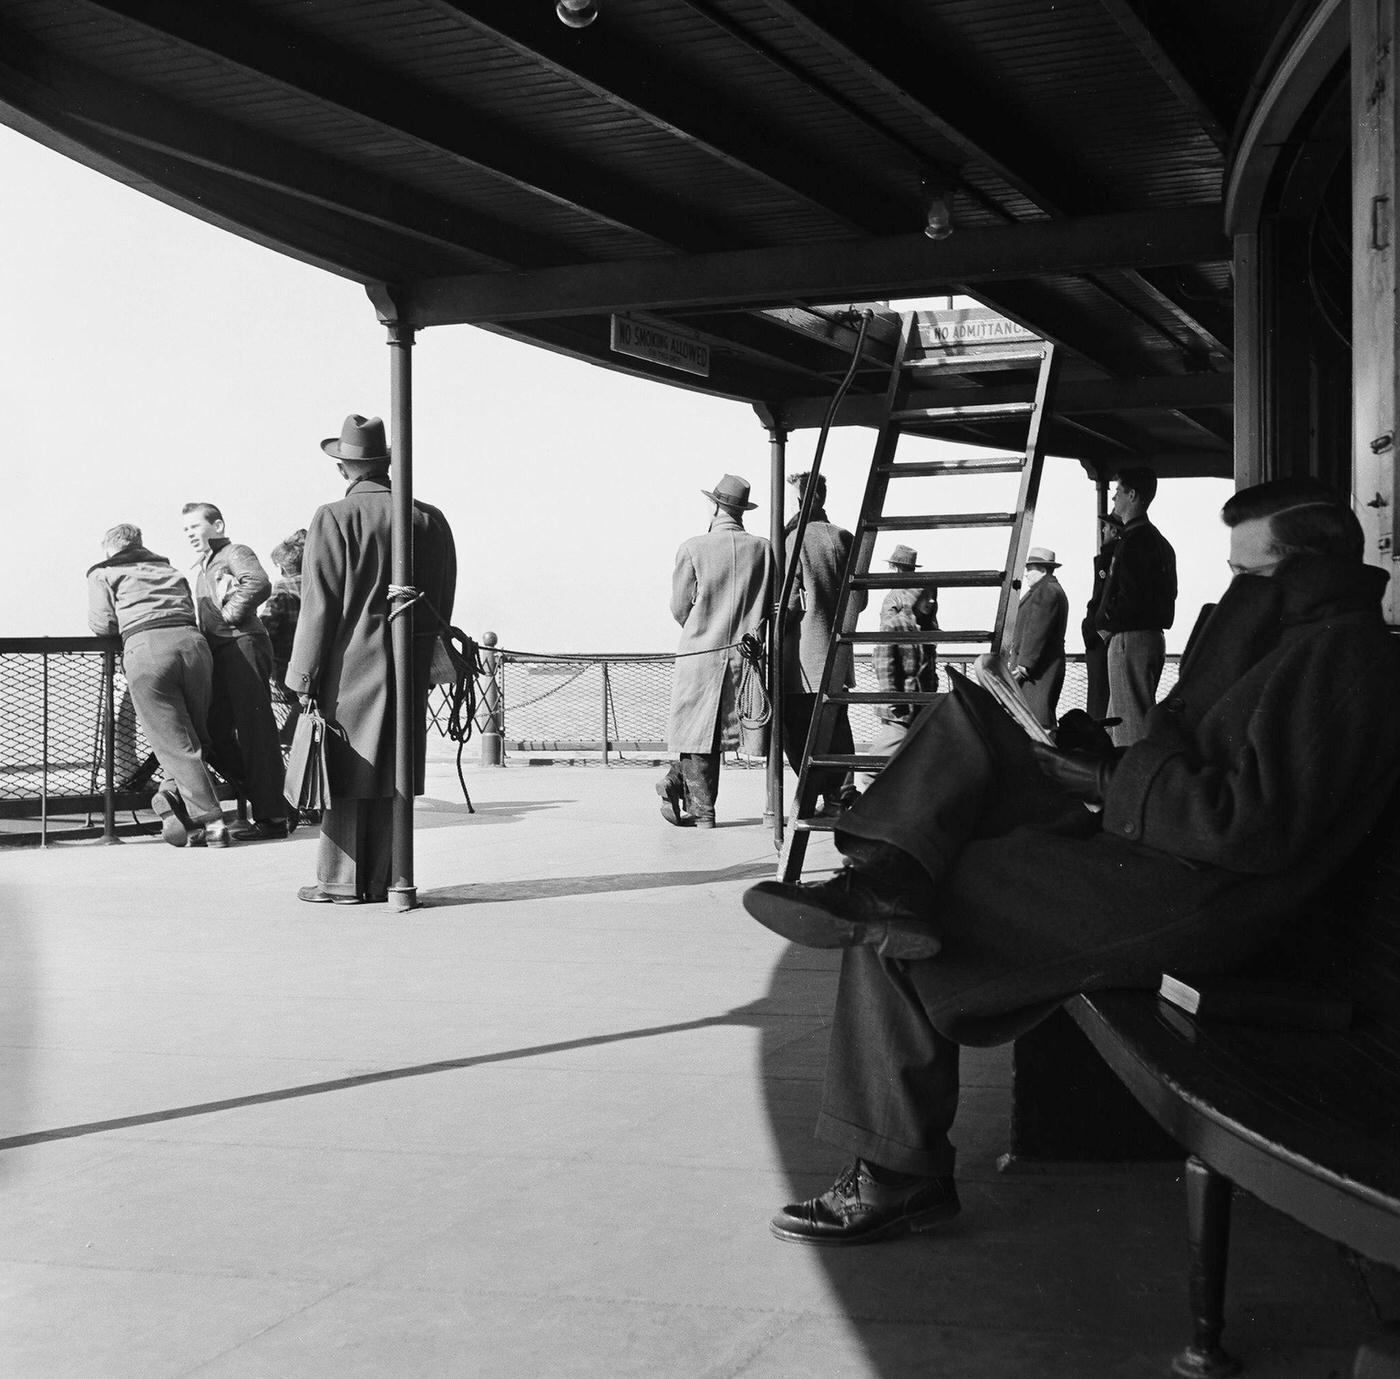 Passengers Enjoy The Outdoor Deck During A Trip On The Staten Island Ferry, 1948.